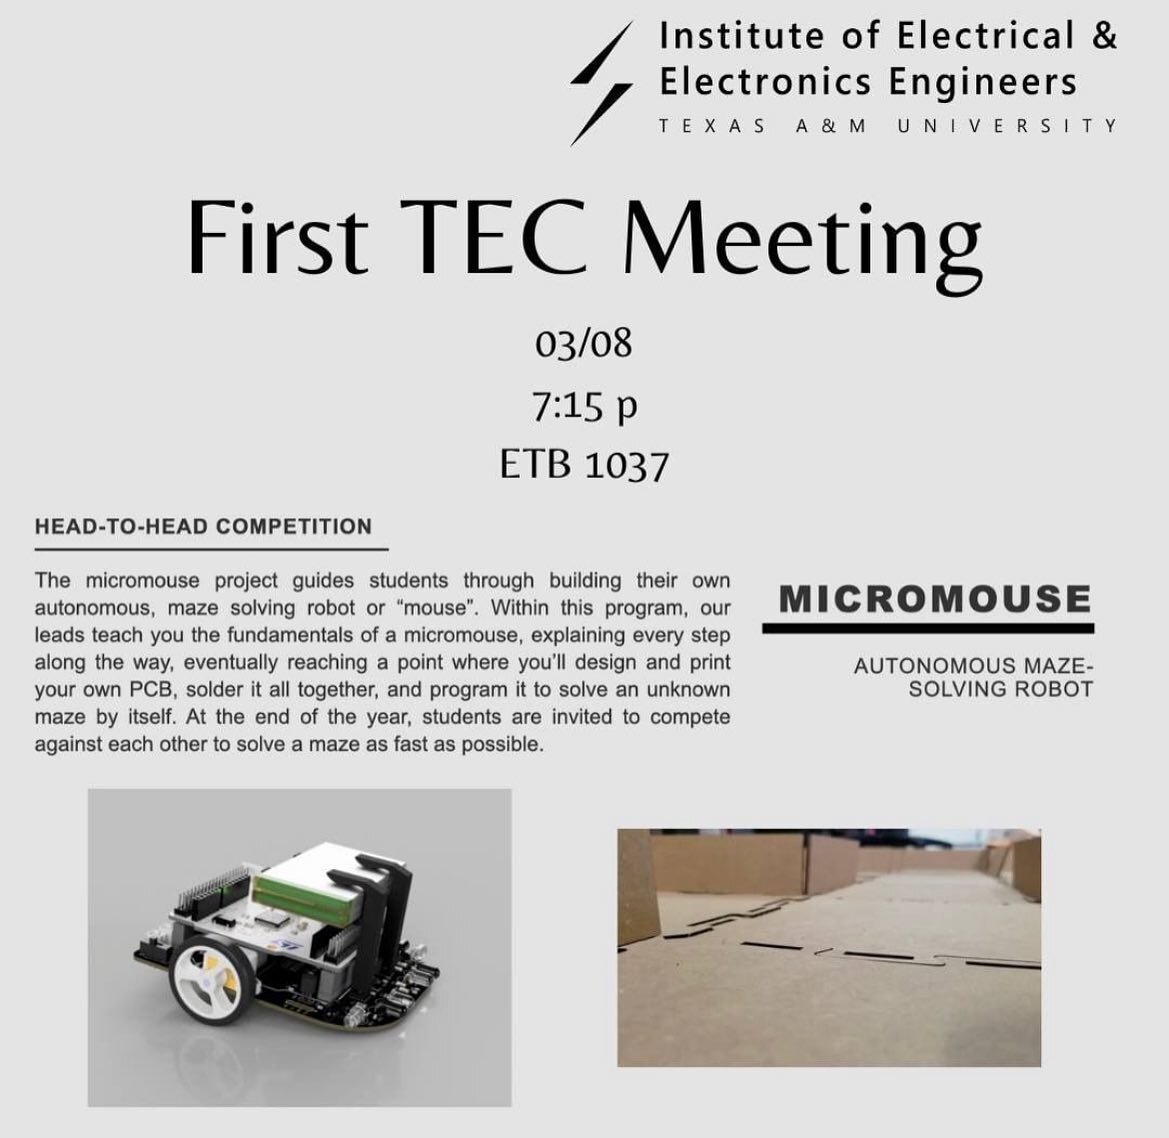 FIRST TEC MEETING
MAR 08 | 7:15 - 8:30 | ETB 1037
----------------------------------------
More information and links can be found in the newsletter linktr.ee/ieee_tamu or click the link in bio.